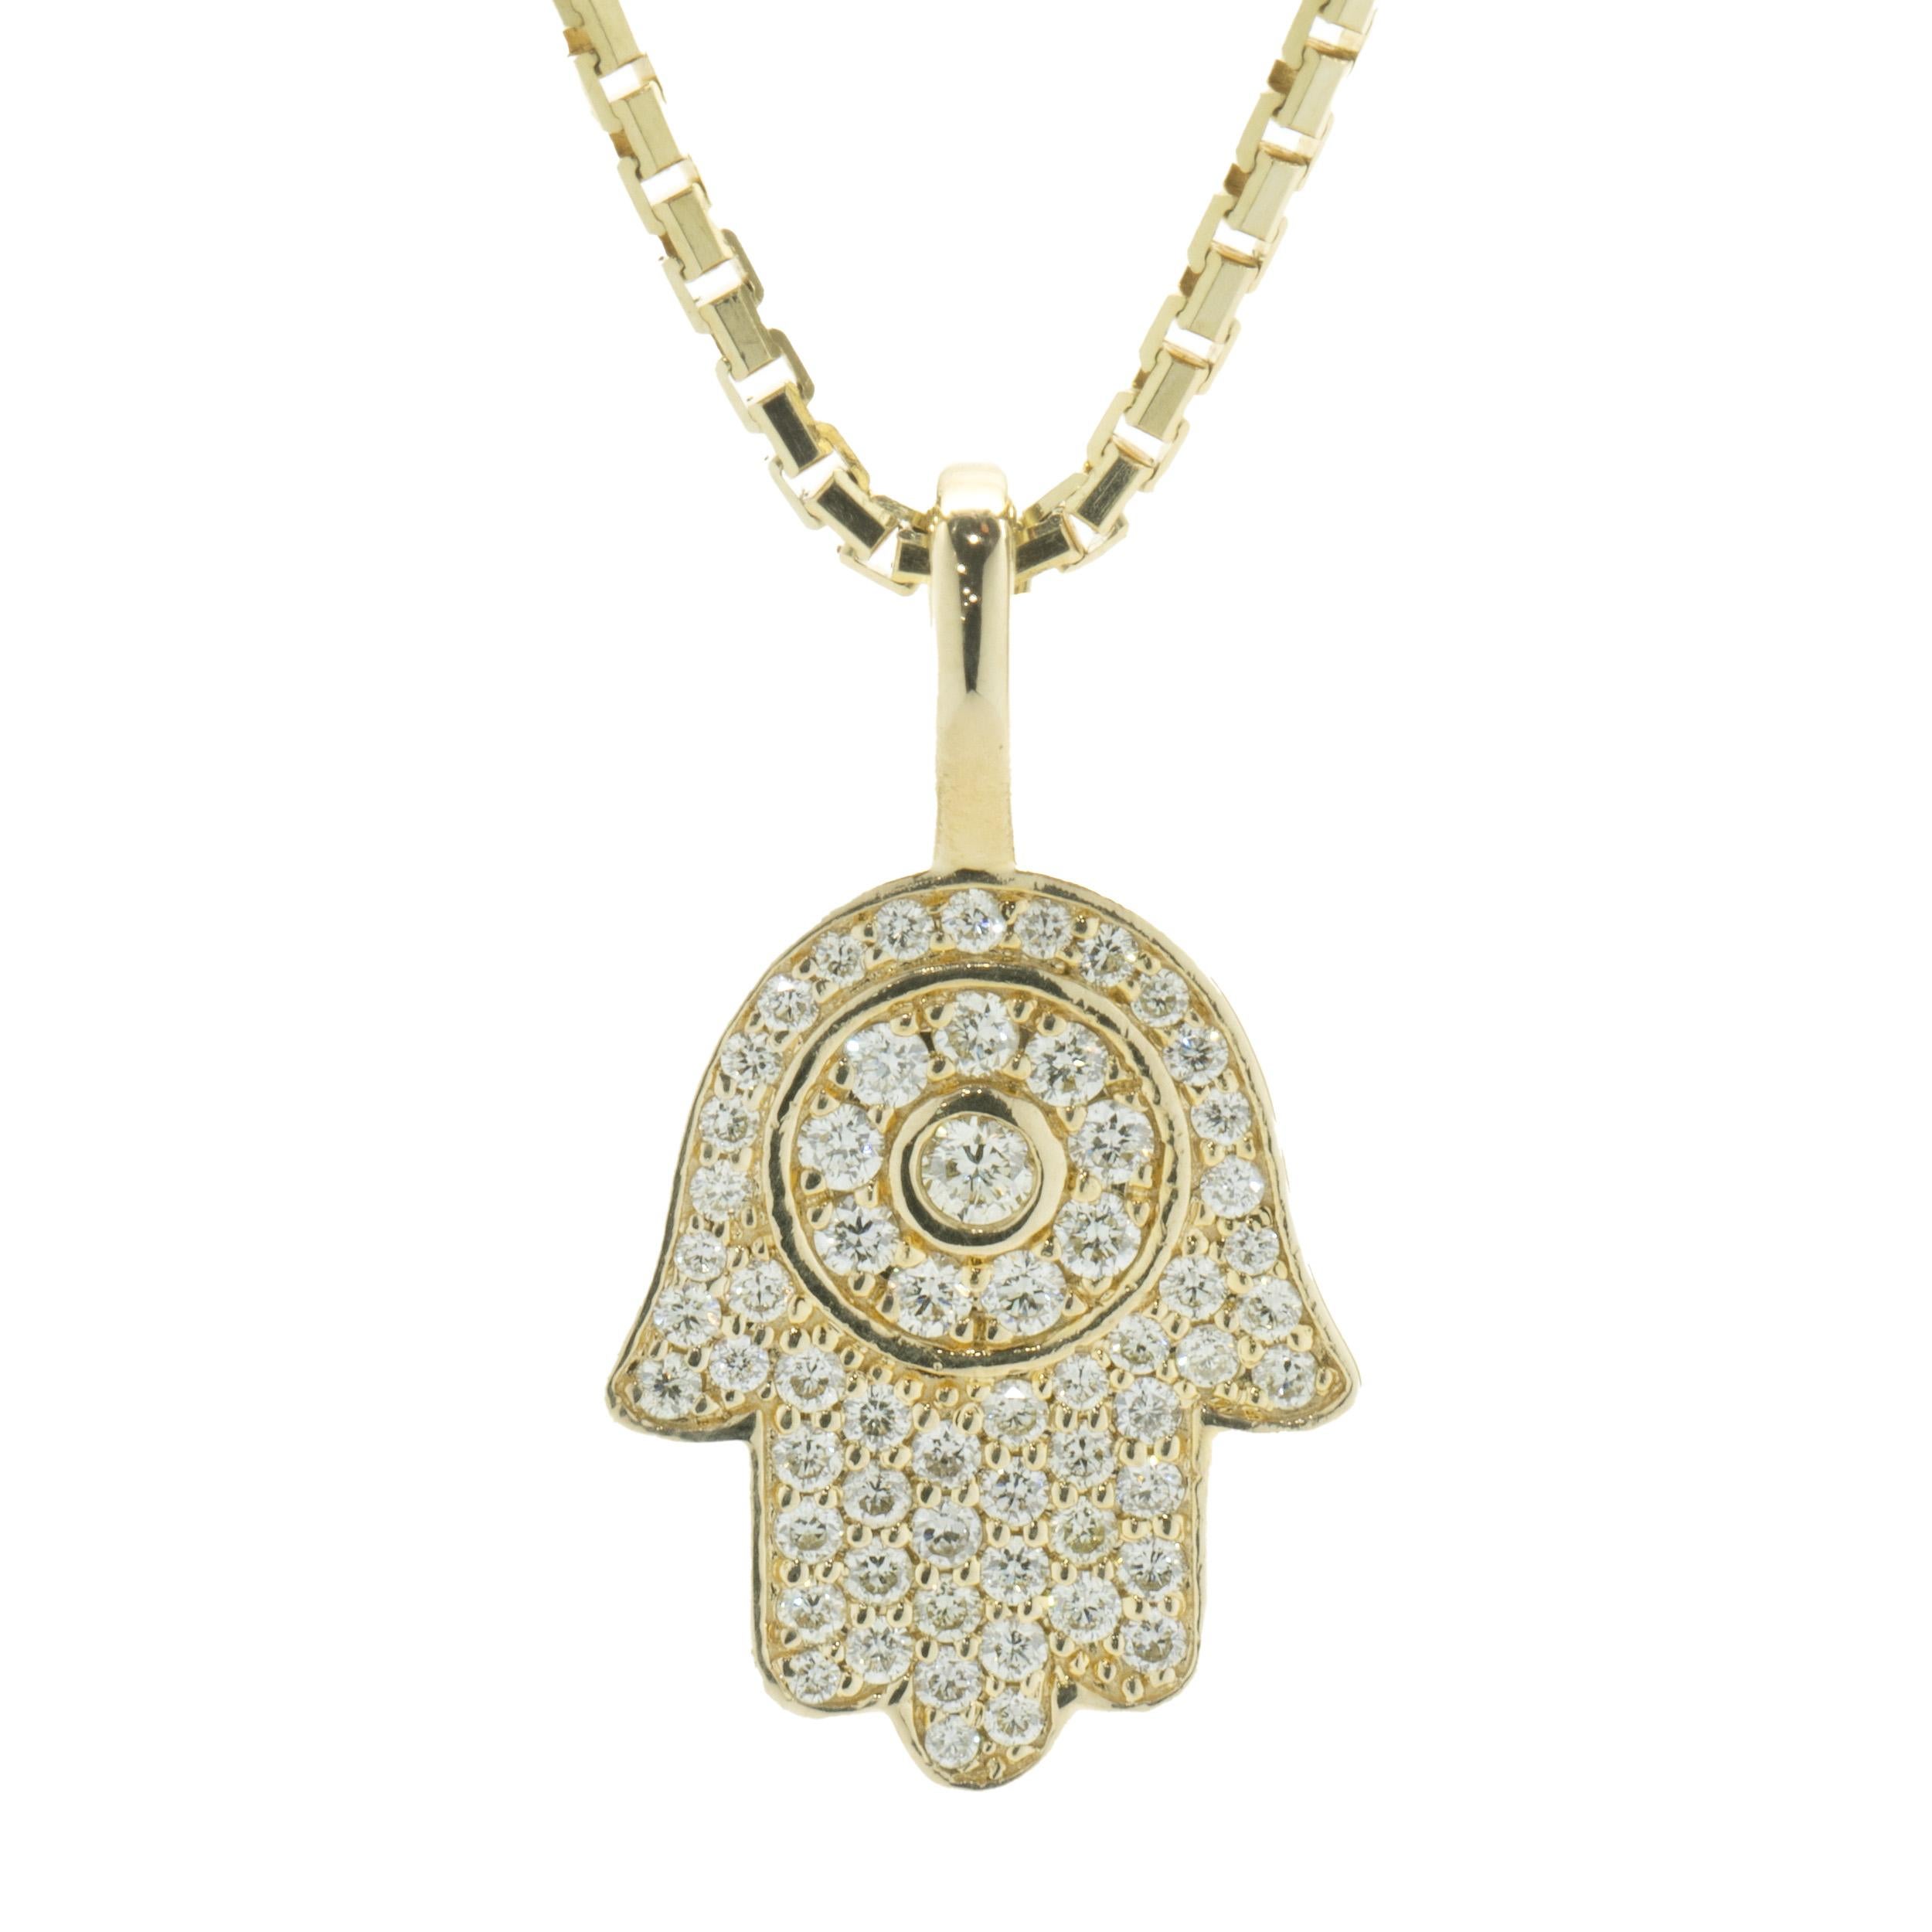 Designer: Ice box
Material: 14K yellow gold
Diamonds: 65 round brilliant cut = 1.00ct
Color: G
Clarity: VS1-2
Dimensions: necklace measures 20-inches in length 
Weight: 9.15 grams
